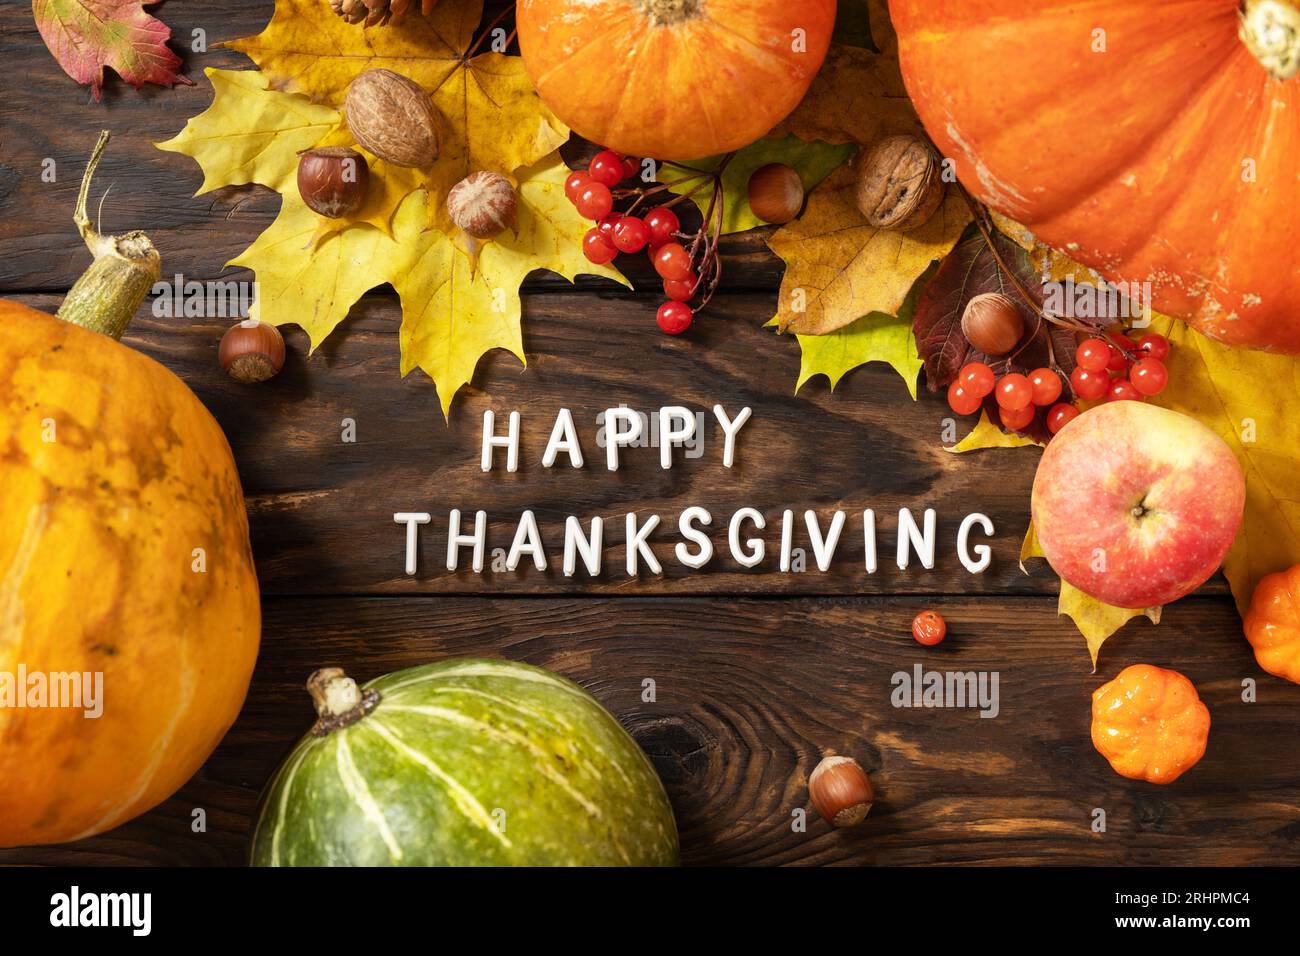 Autumn Day Thanksgiving background. Festive autumn decor from ripe pumpkins, berries and leaves on a wooden background. View from above. Stock Photo